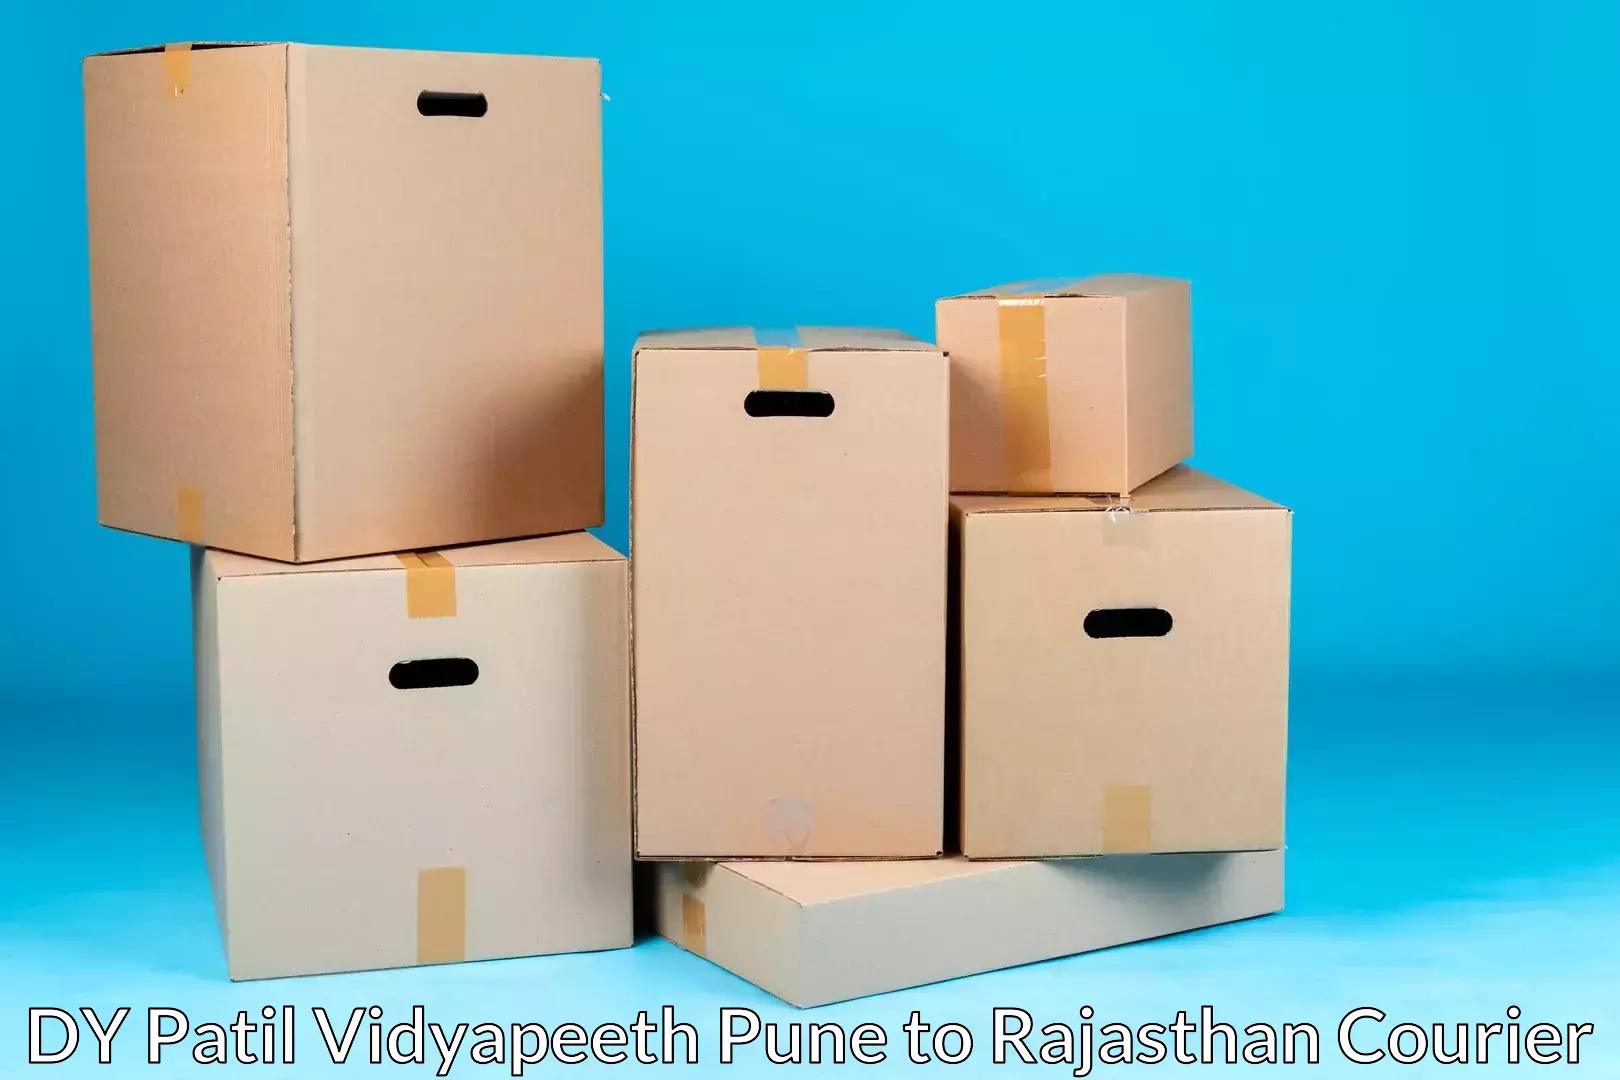 Nationwide moving services DY Patil Vidyapeeth Pune to Chhabra